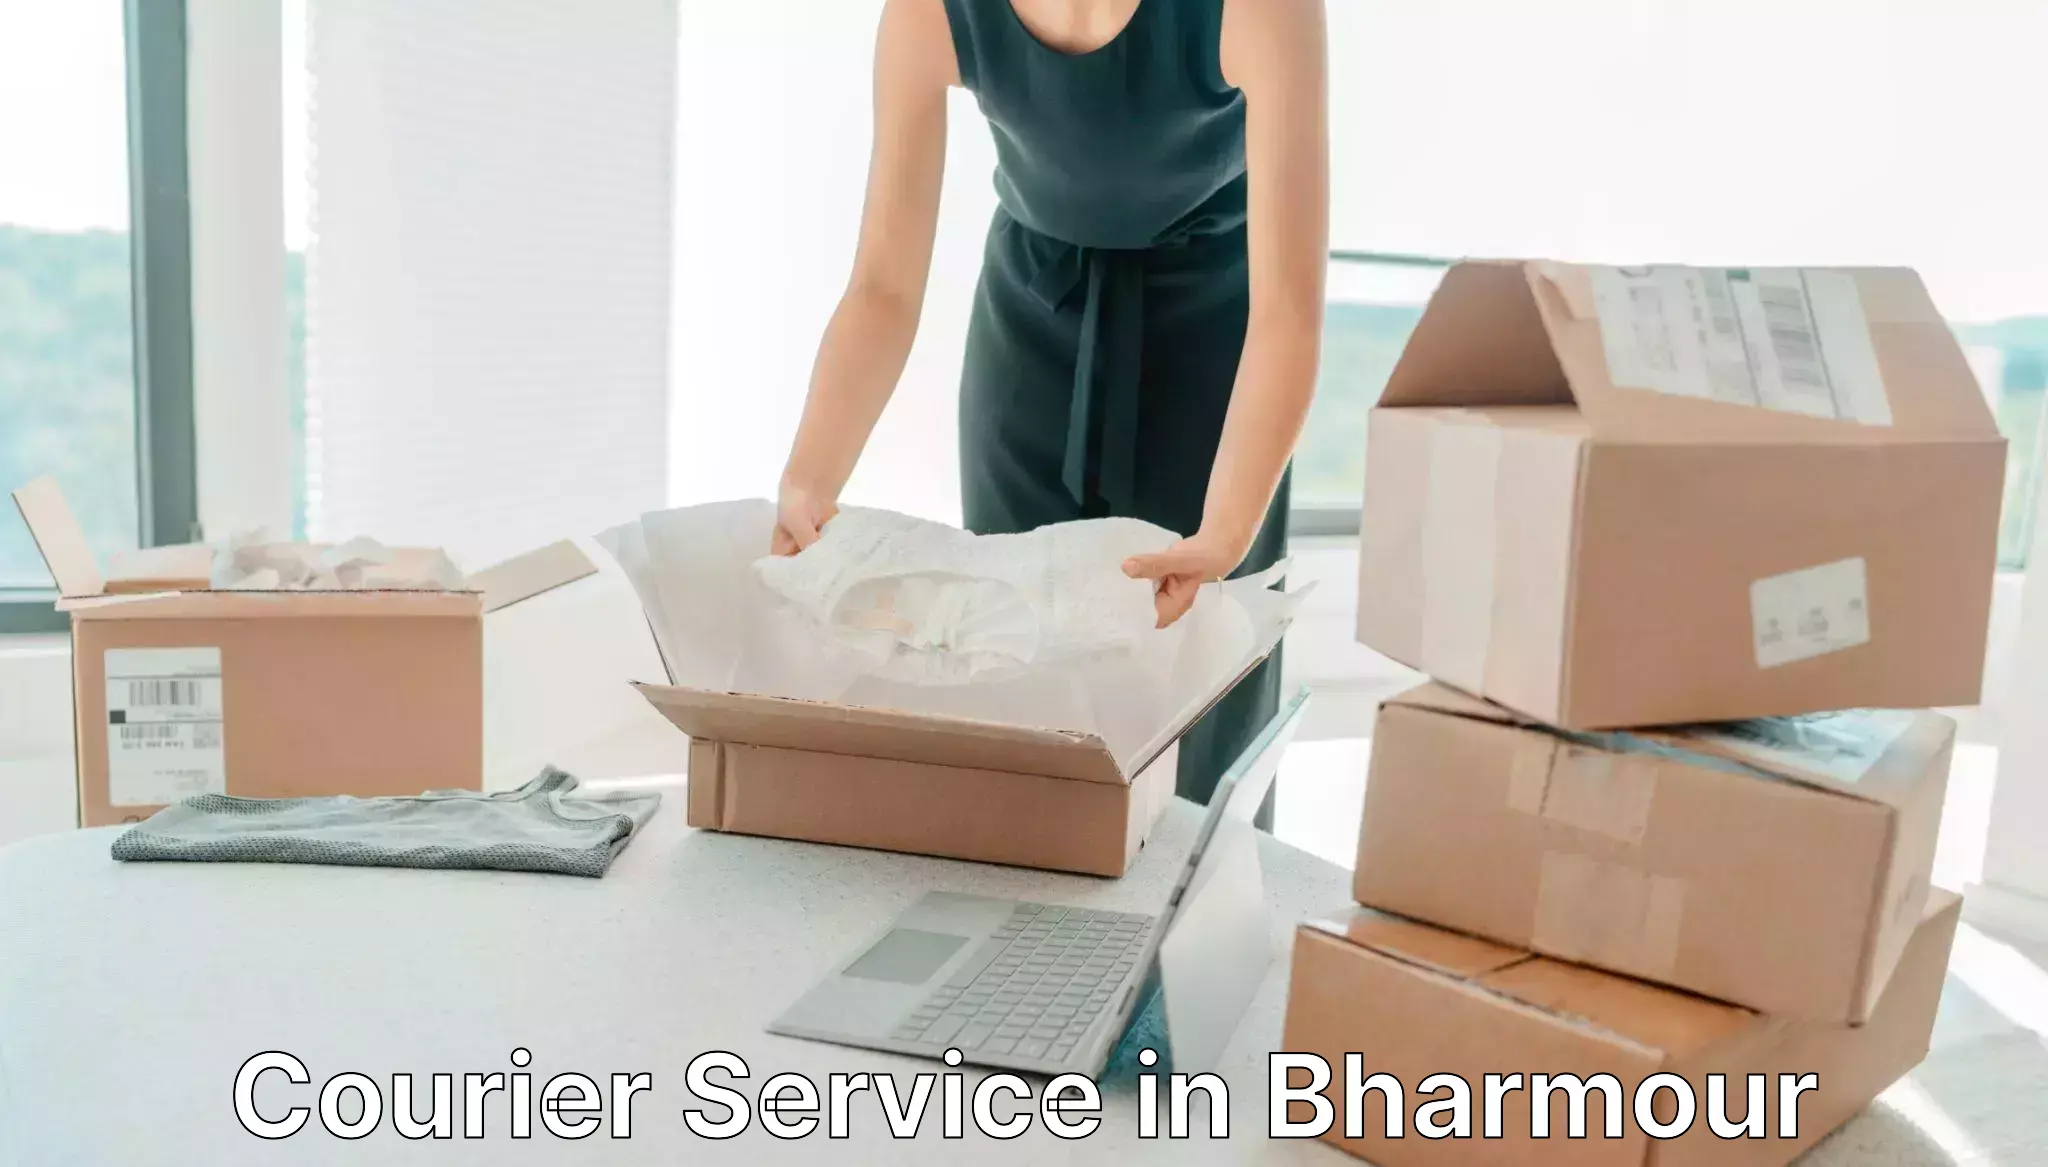 Courier service innovation in Bharmour